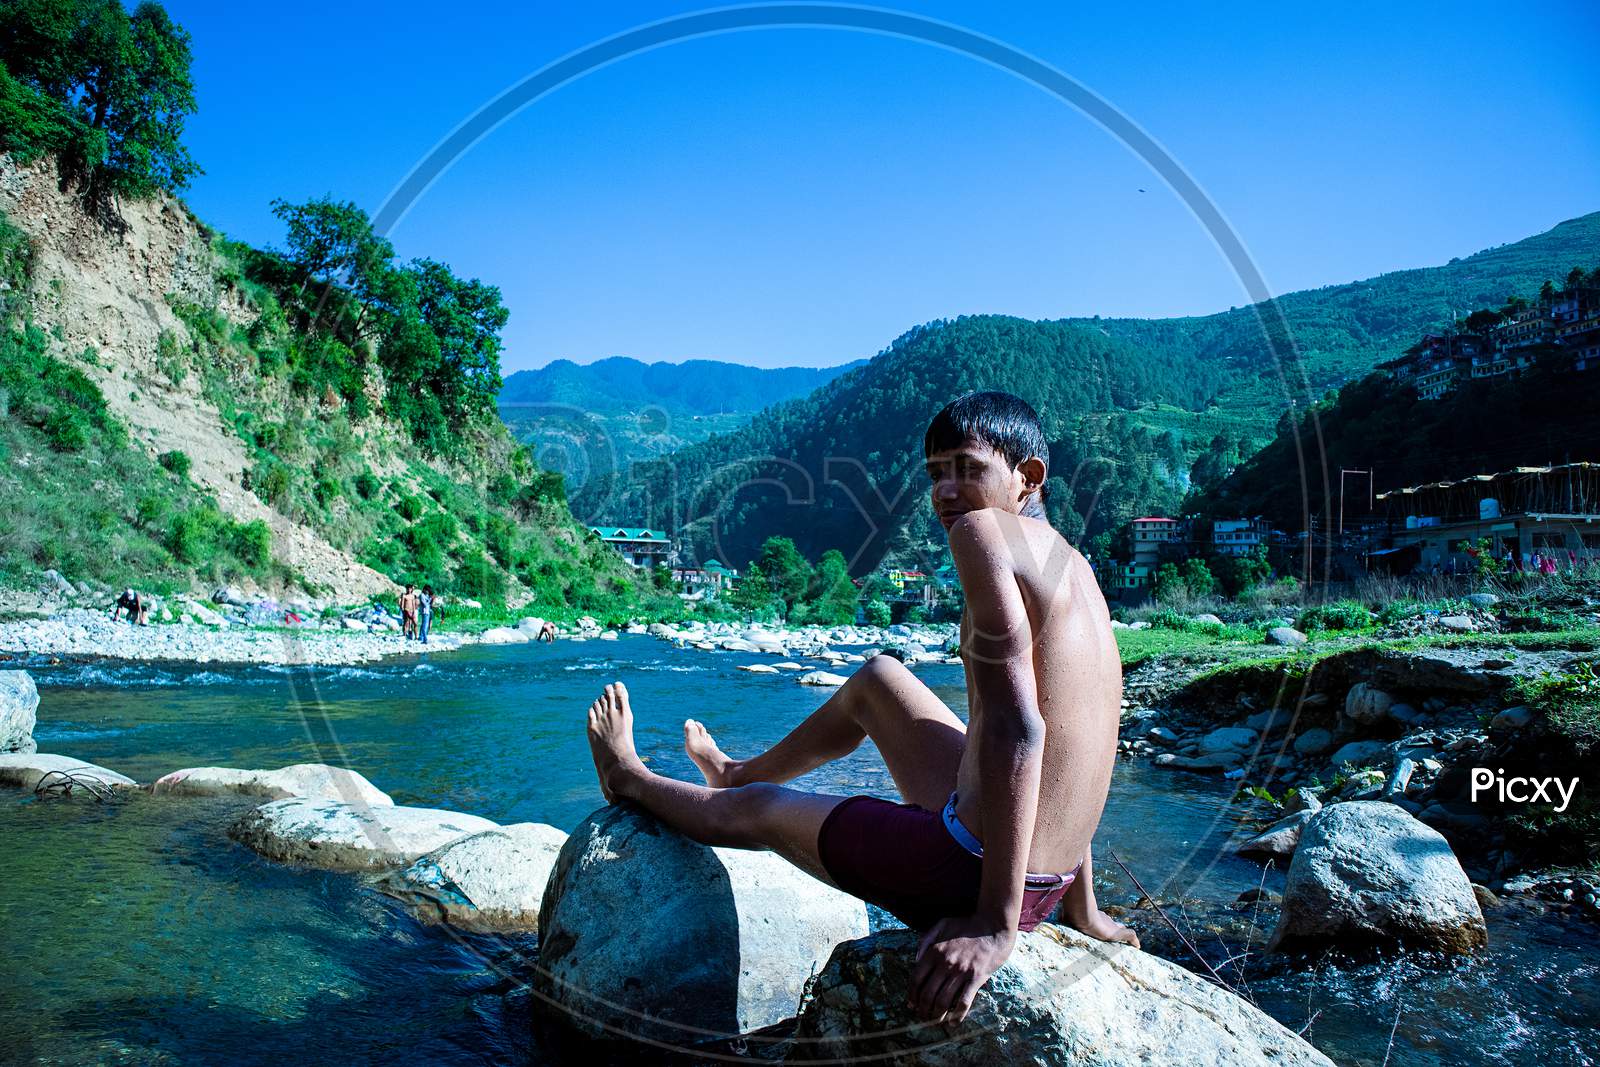 Nerwa, Himachal Pradesh, India - July 20Th, 2019: Young Boy Sitting On A Rock Near Flowing River